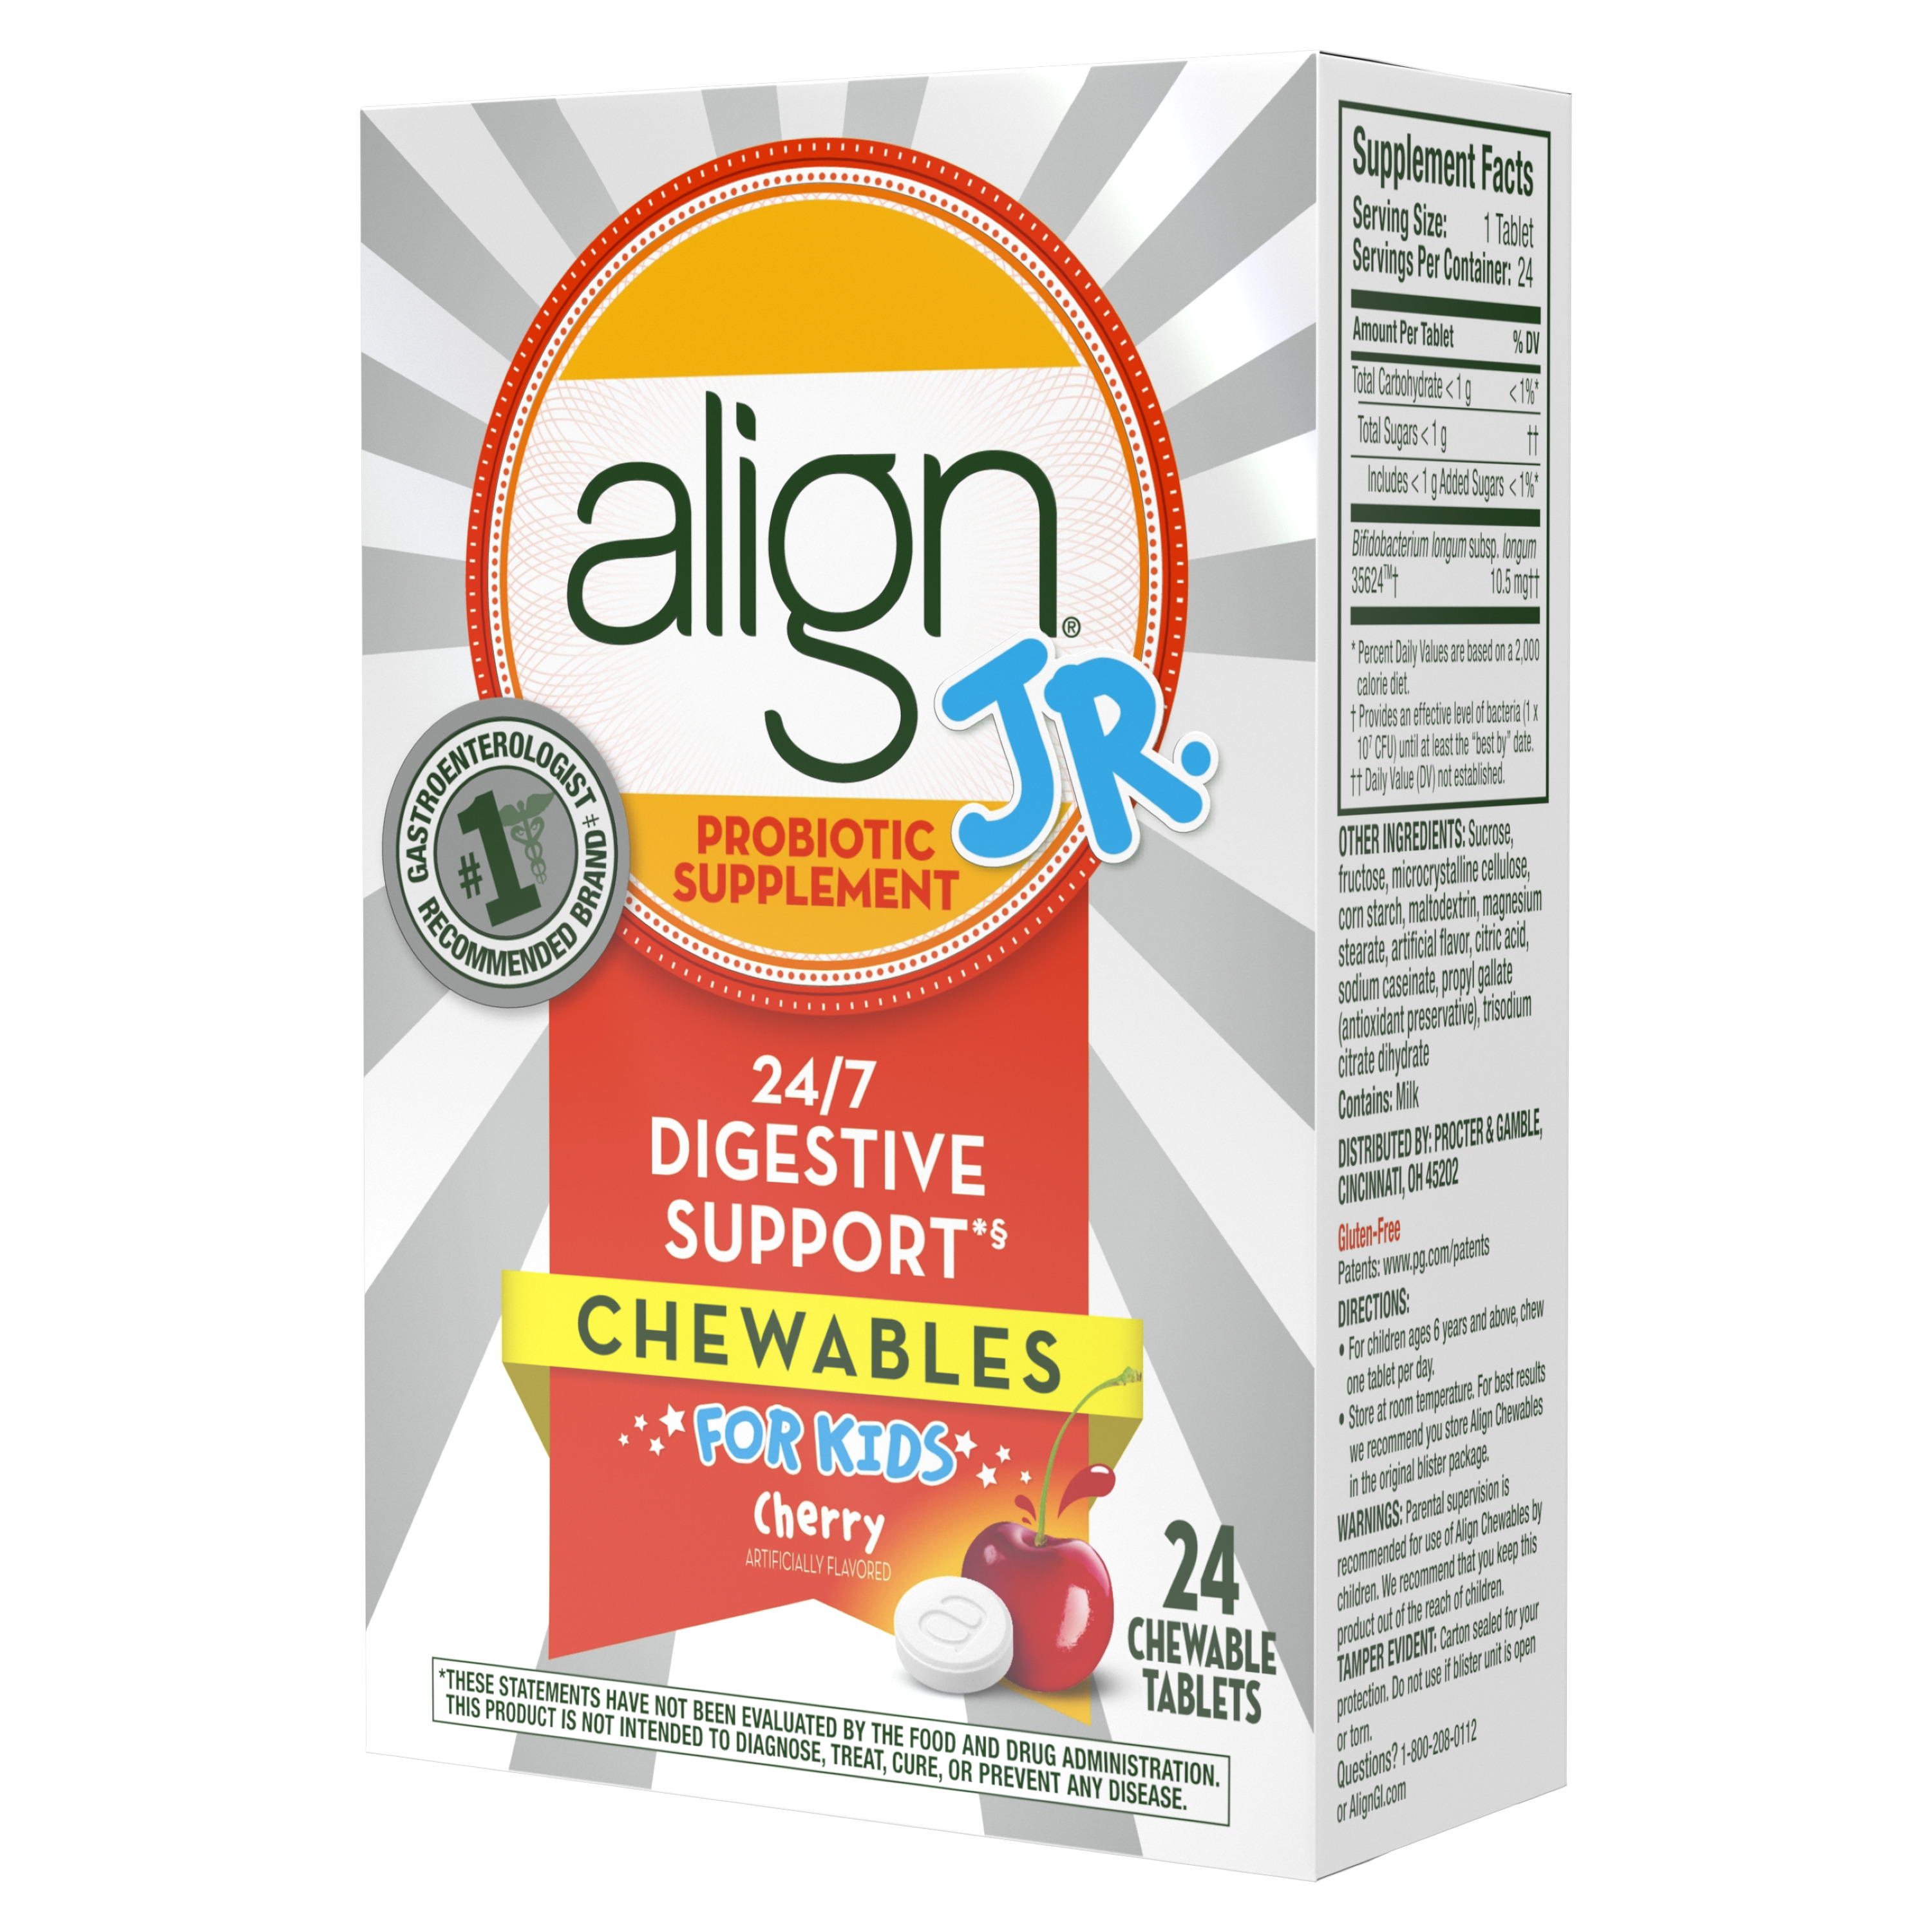 Align Jr. Chewables for Children, Daily Probiotic Supplement for Kids Digestive Health, Cherry Smoothie Flavor, 24 count, #1 Recommended Probiotic by Brand by Doctors - image 2 of 6